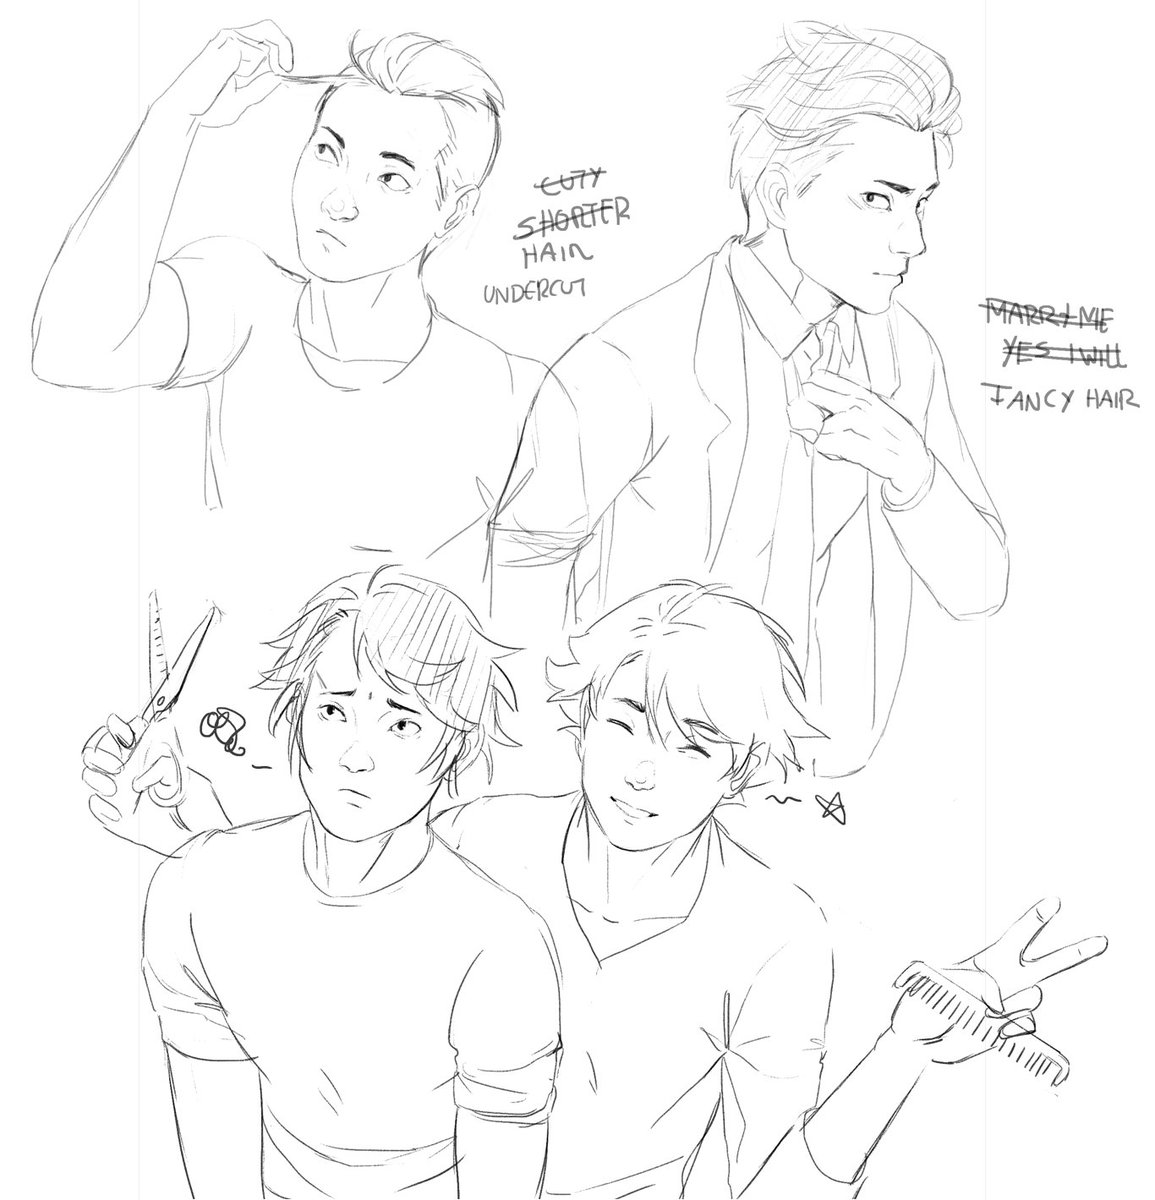 bonus ther option? 
i mean... i like the undercut idea an the just styling his hair back is also an option. 

JUST NEVER LET OIKAWA GET CLOSE TO ANYONES HAIR!!!
(this kid likley only knows how to do his own hairstyle) 